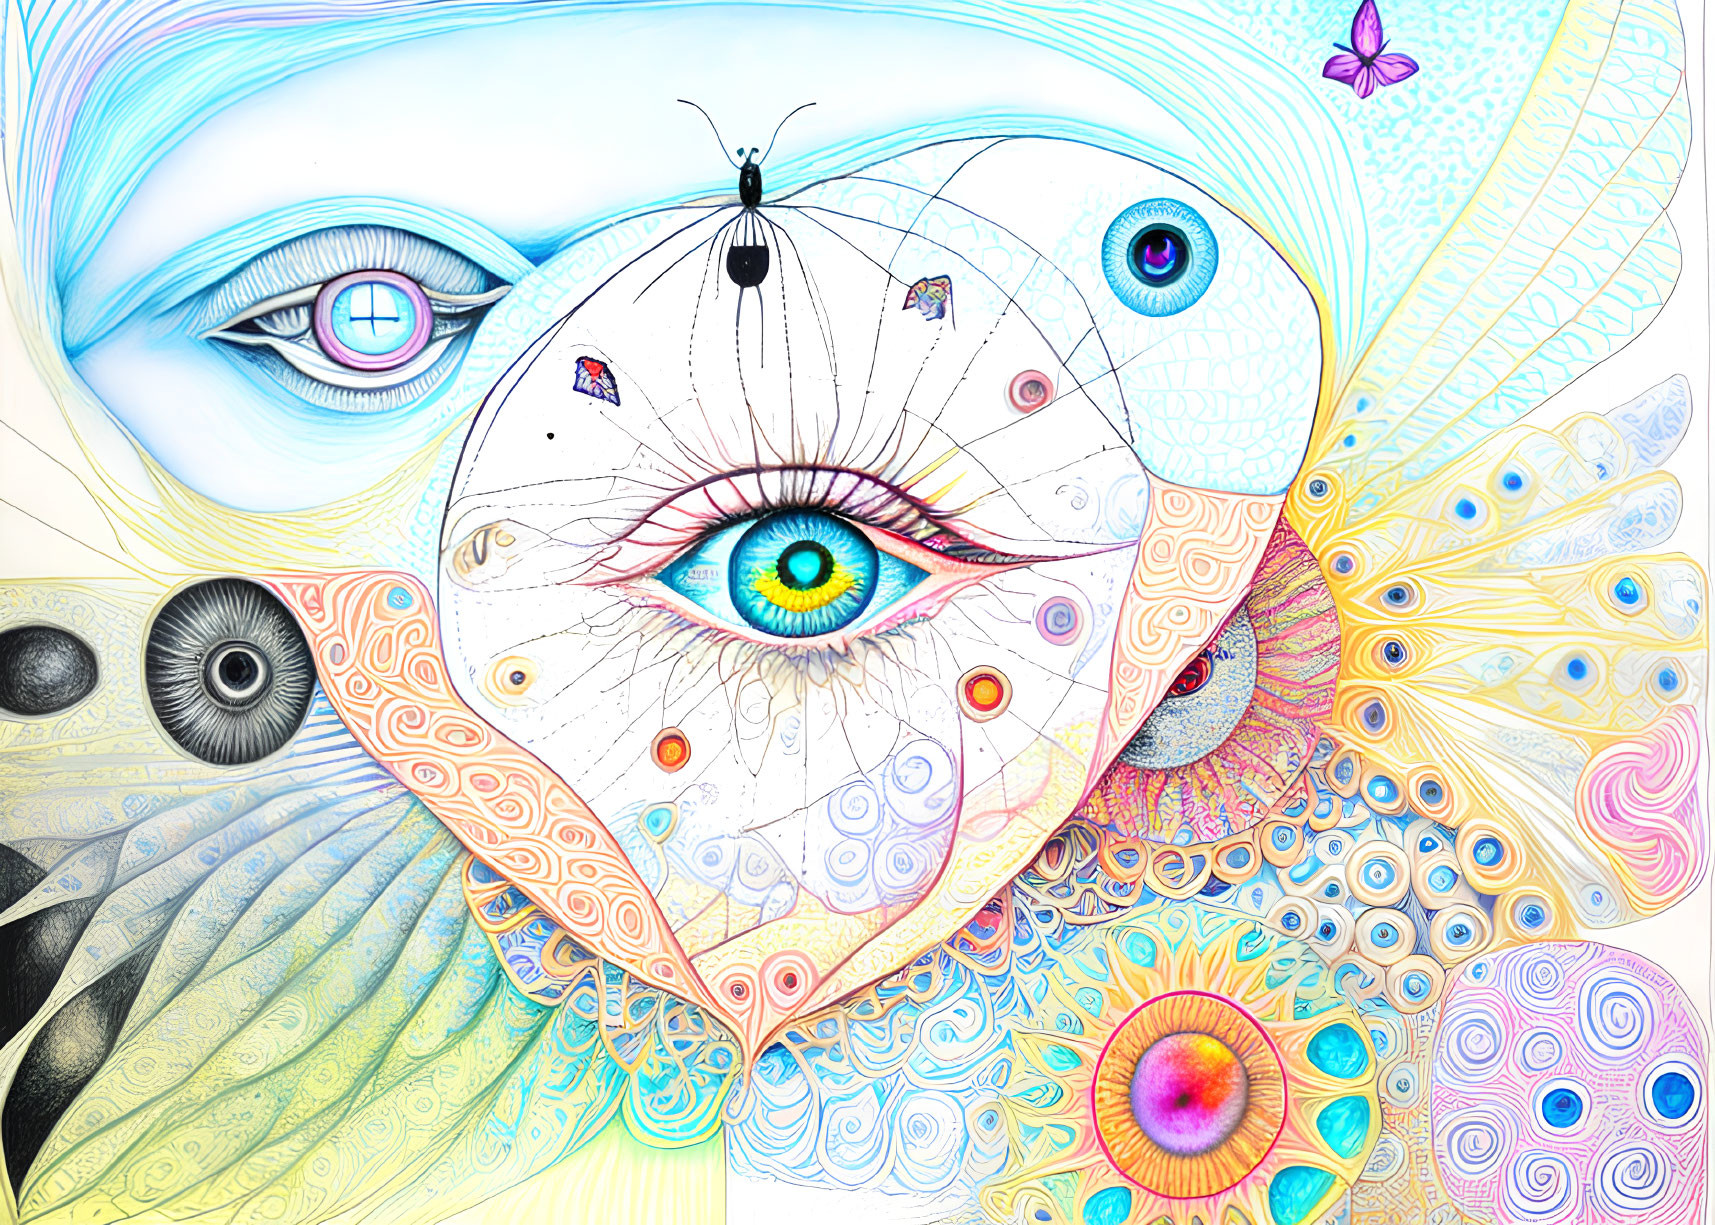 Colorful Surreal Artwork with Multiple Eyes, Butterflies, and Psychedelic Patterns